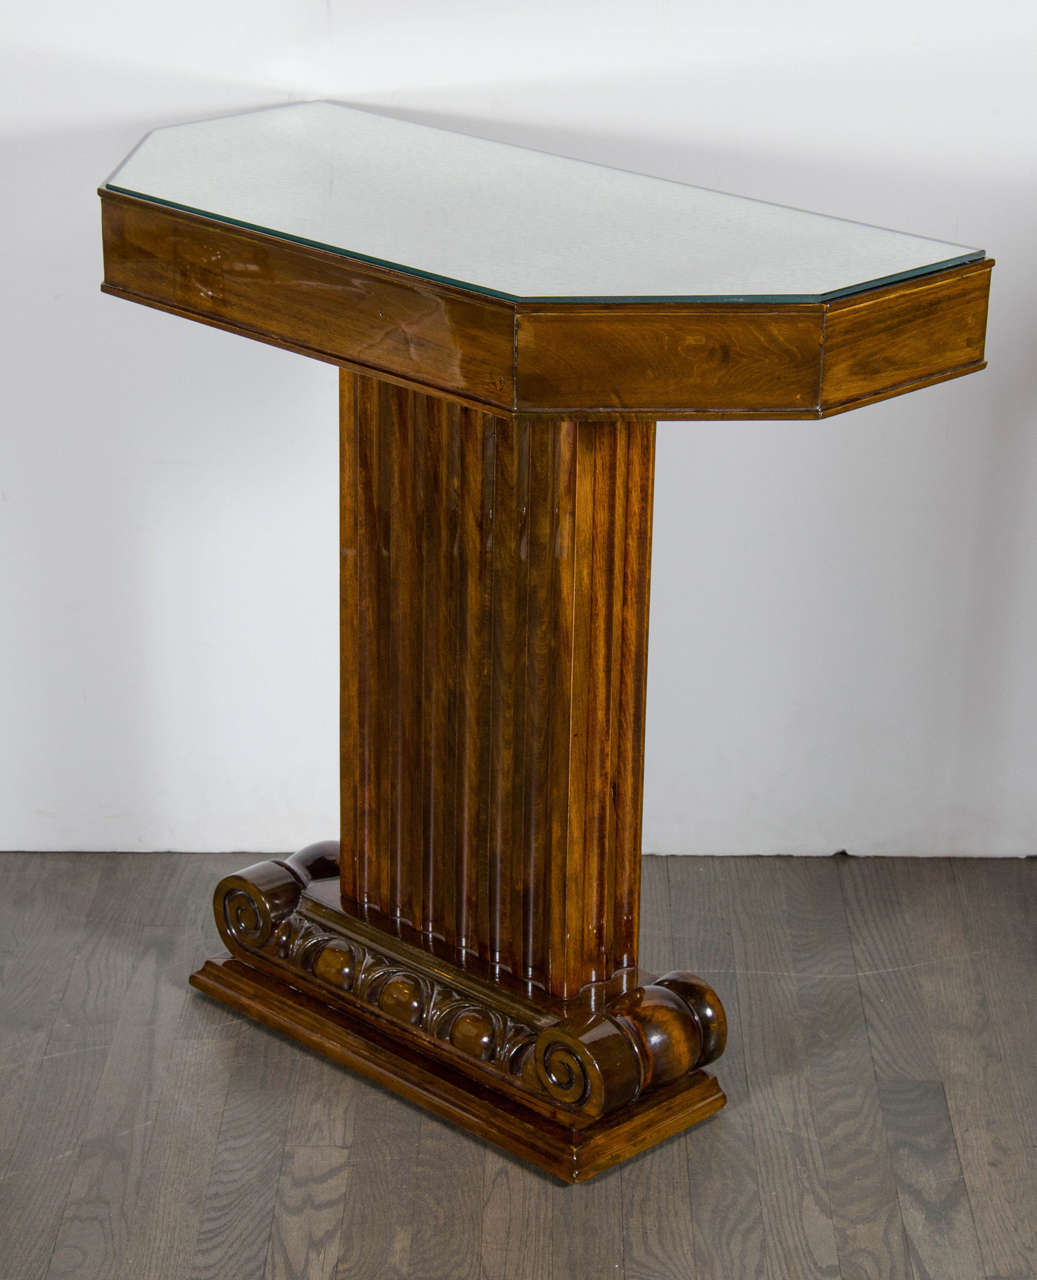 This 1940s Hollywood console in walnut was designed by the esteemed American designer Lorin Jackson for Grosfeld House circa 1945. The console features a column style pedestal base with stylized ionic column and fluted detailed support, as well an